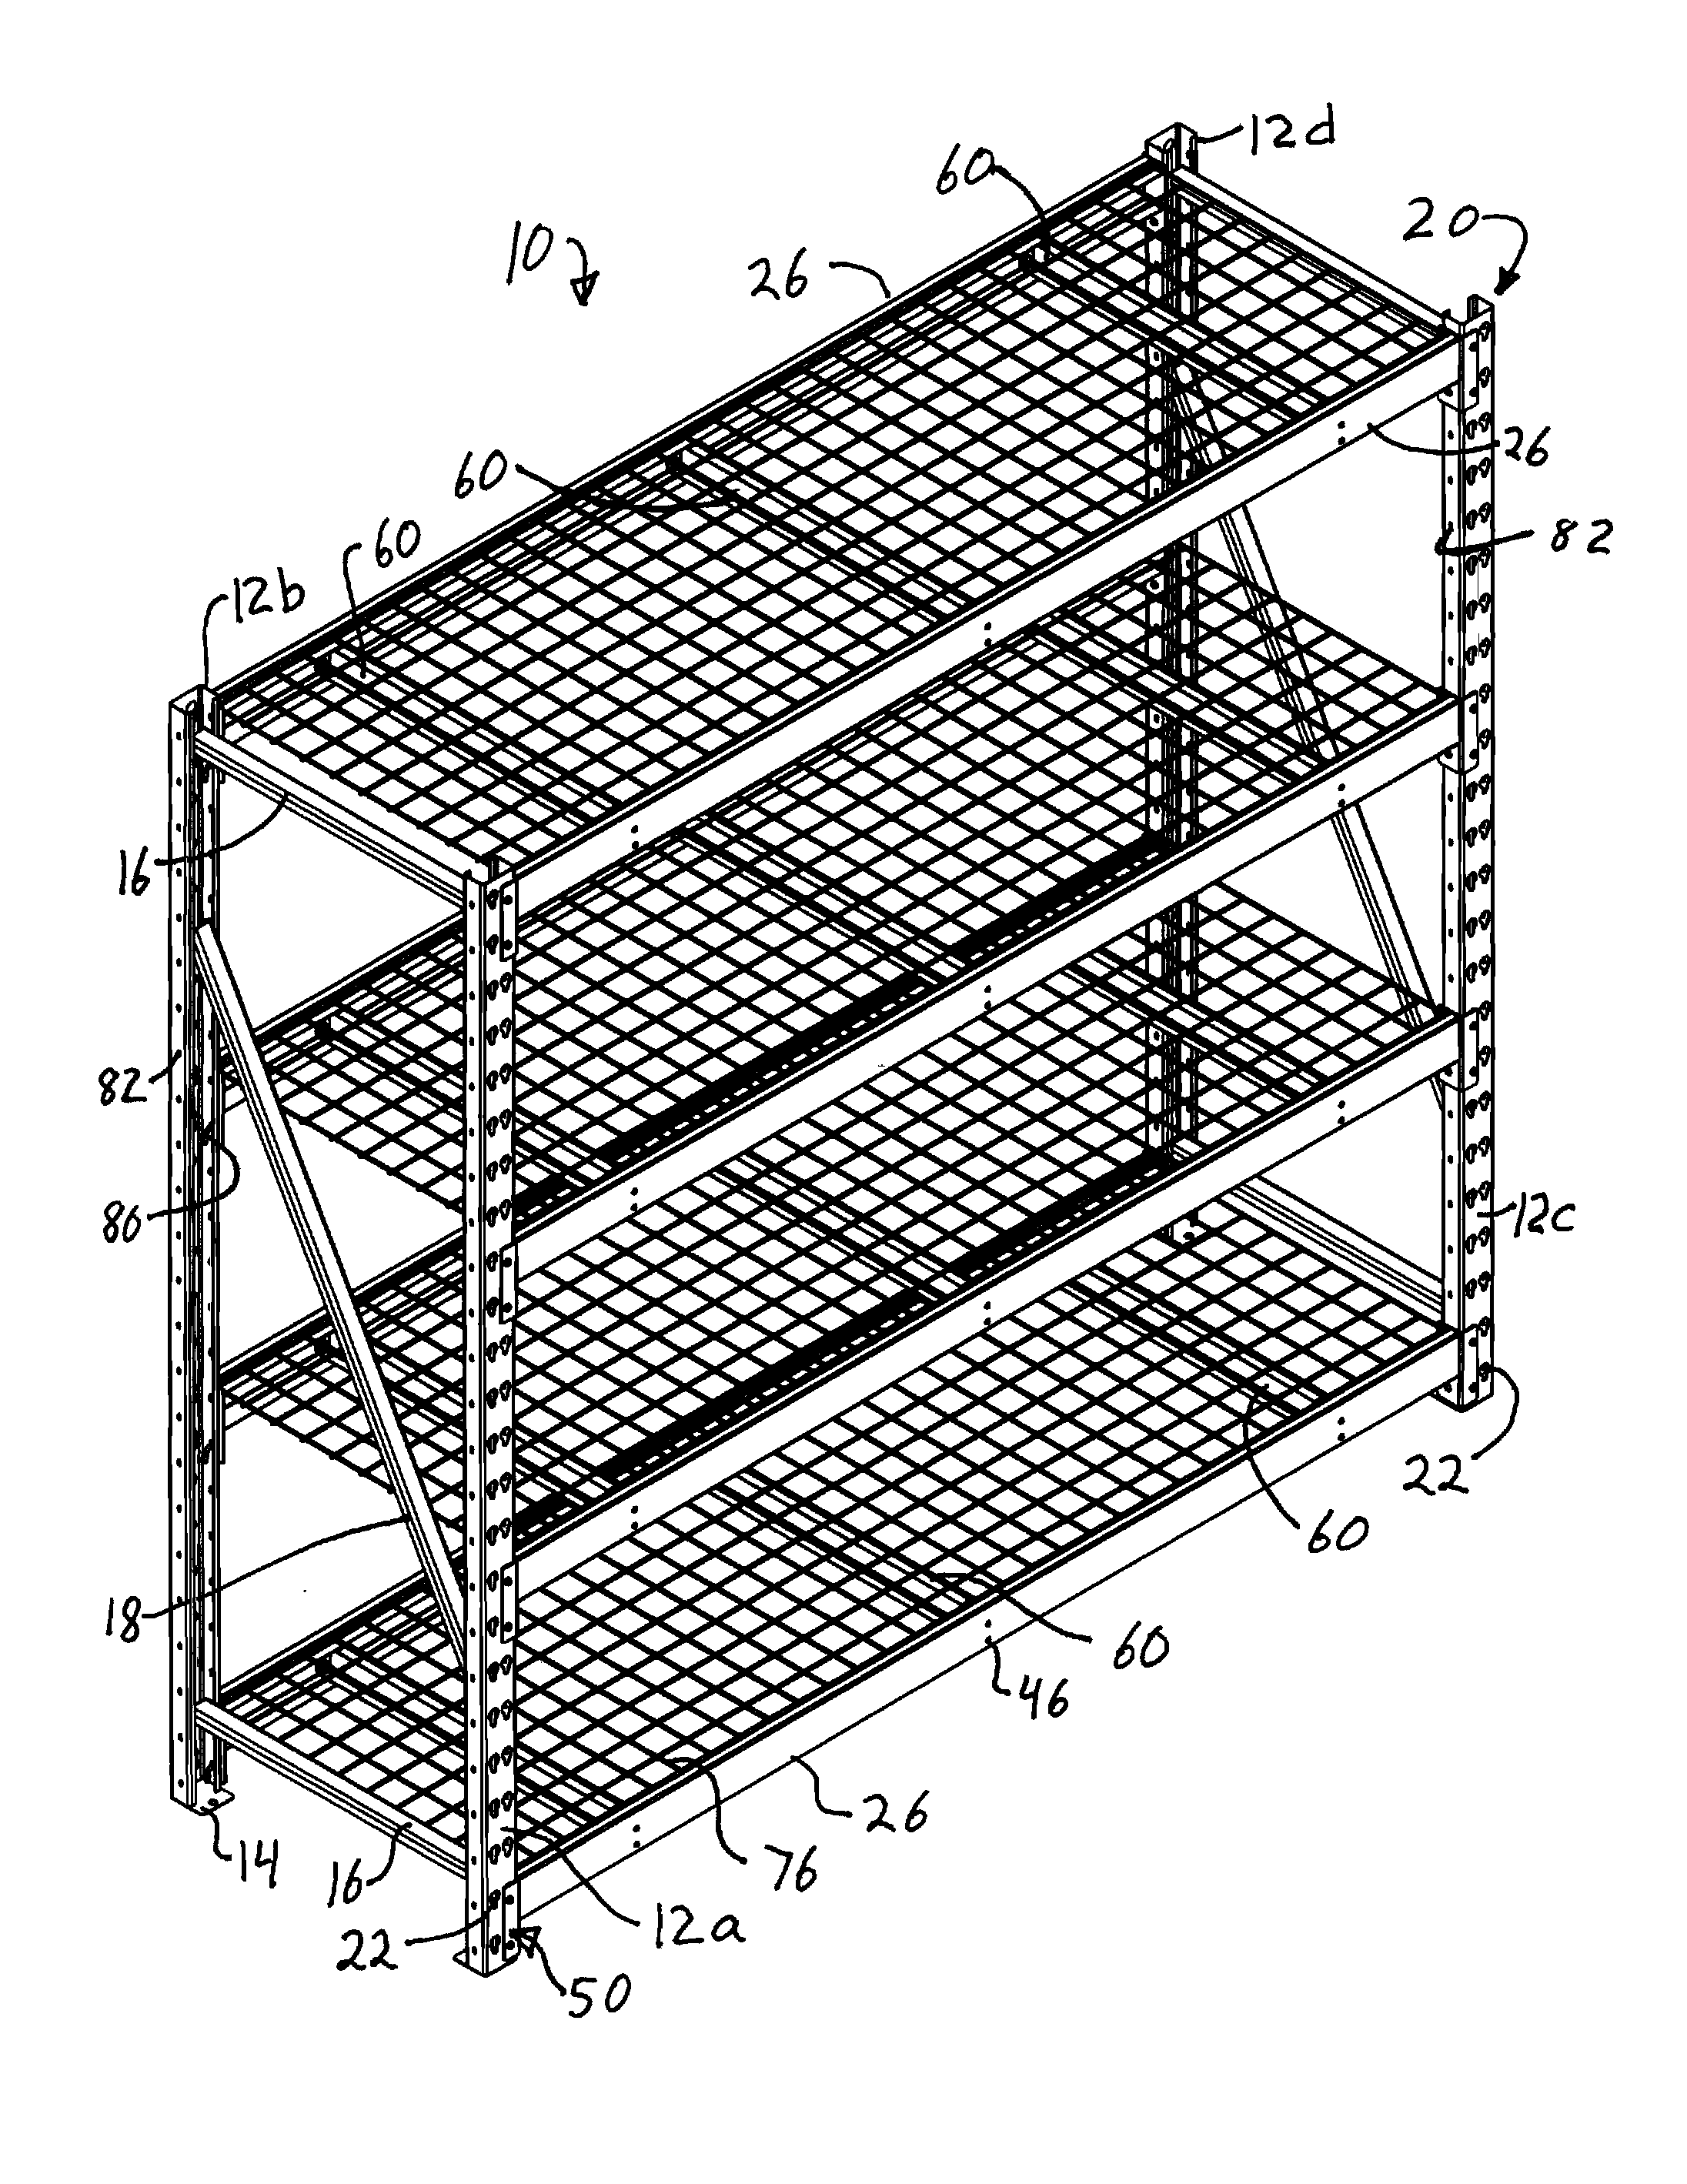 Storage rack and cross-bar support